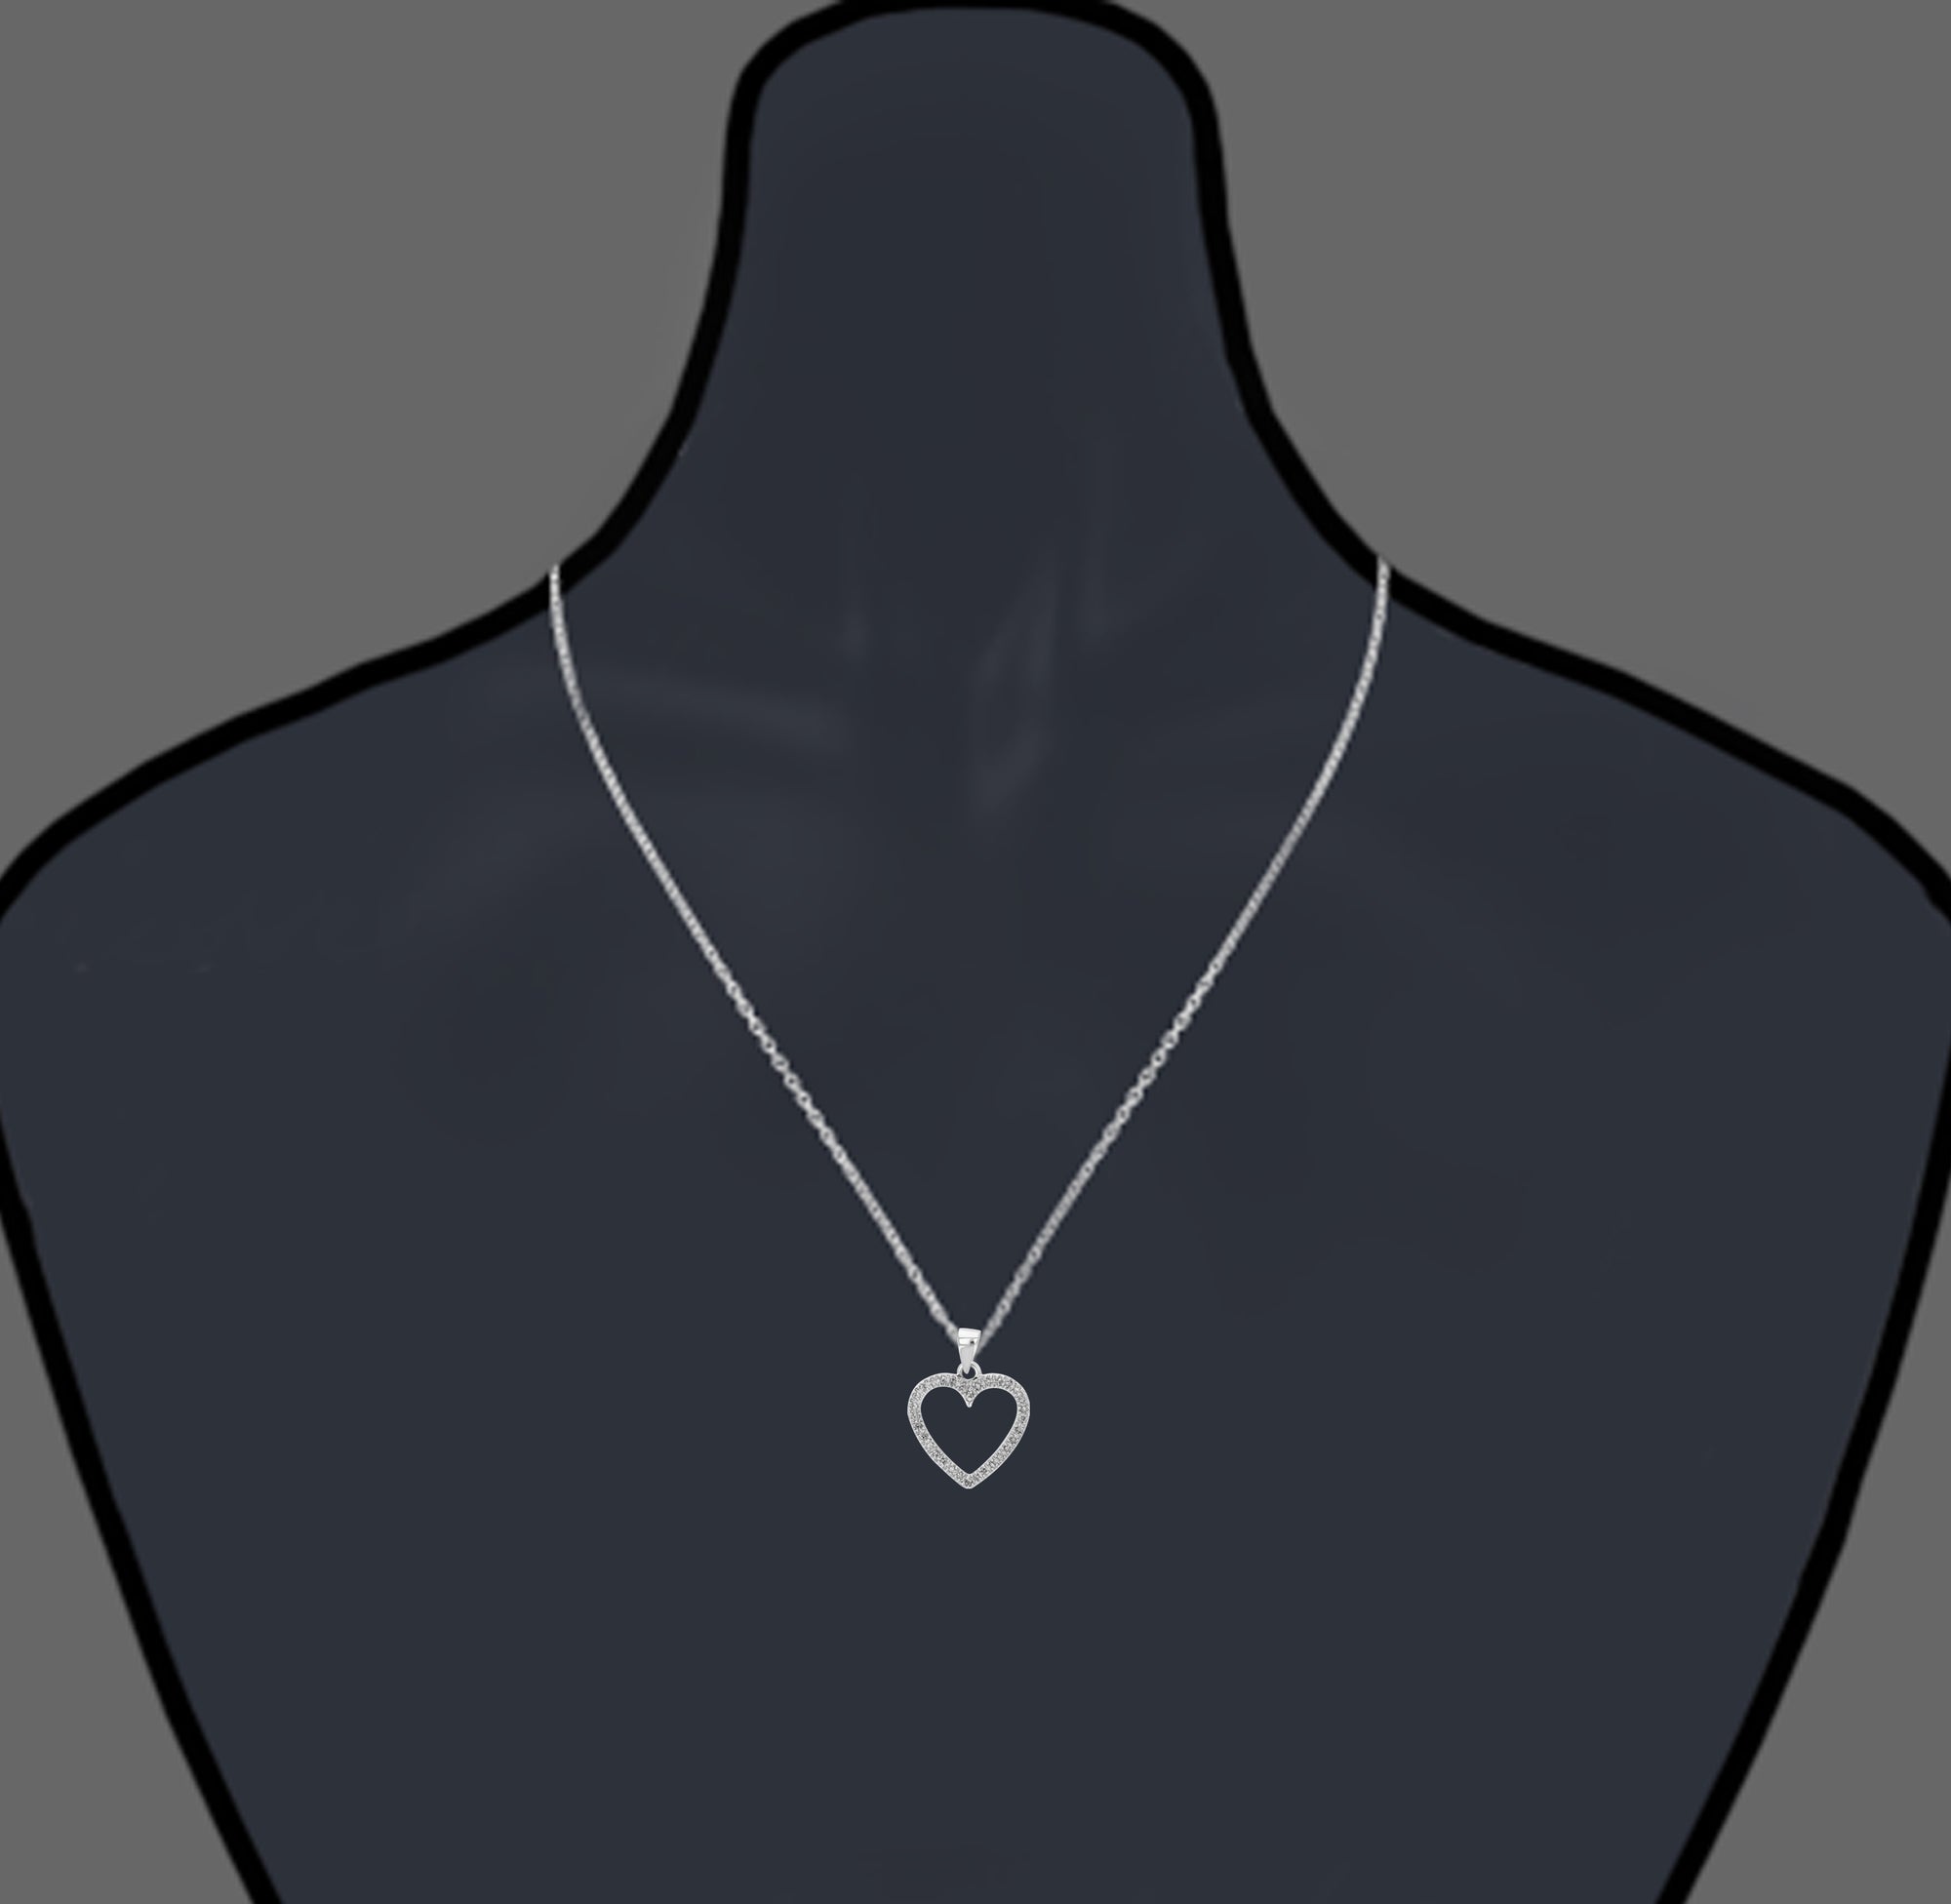 1/6 cttw Diamond Heart Pendant Necklace 14K White Gold with 18 Inch Chain